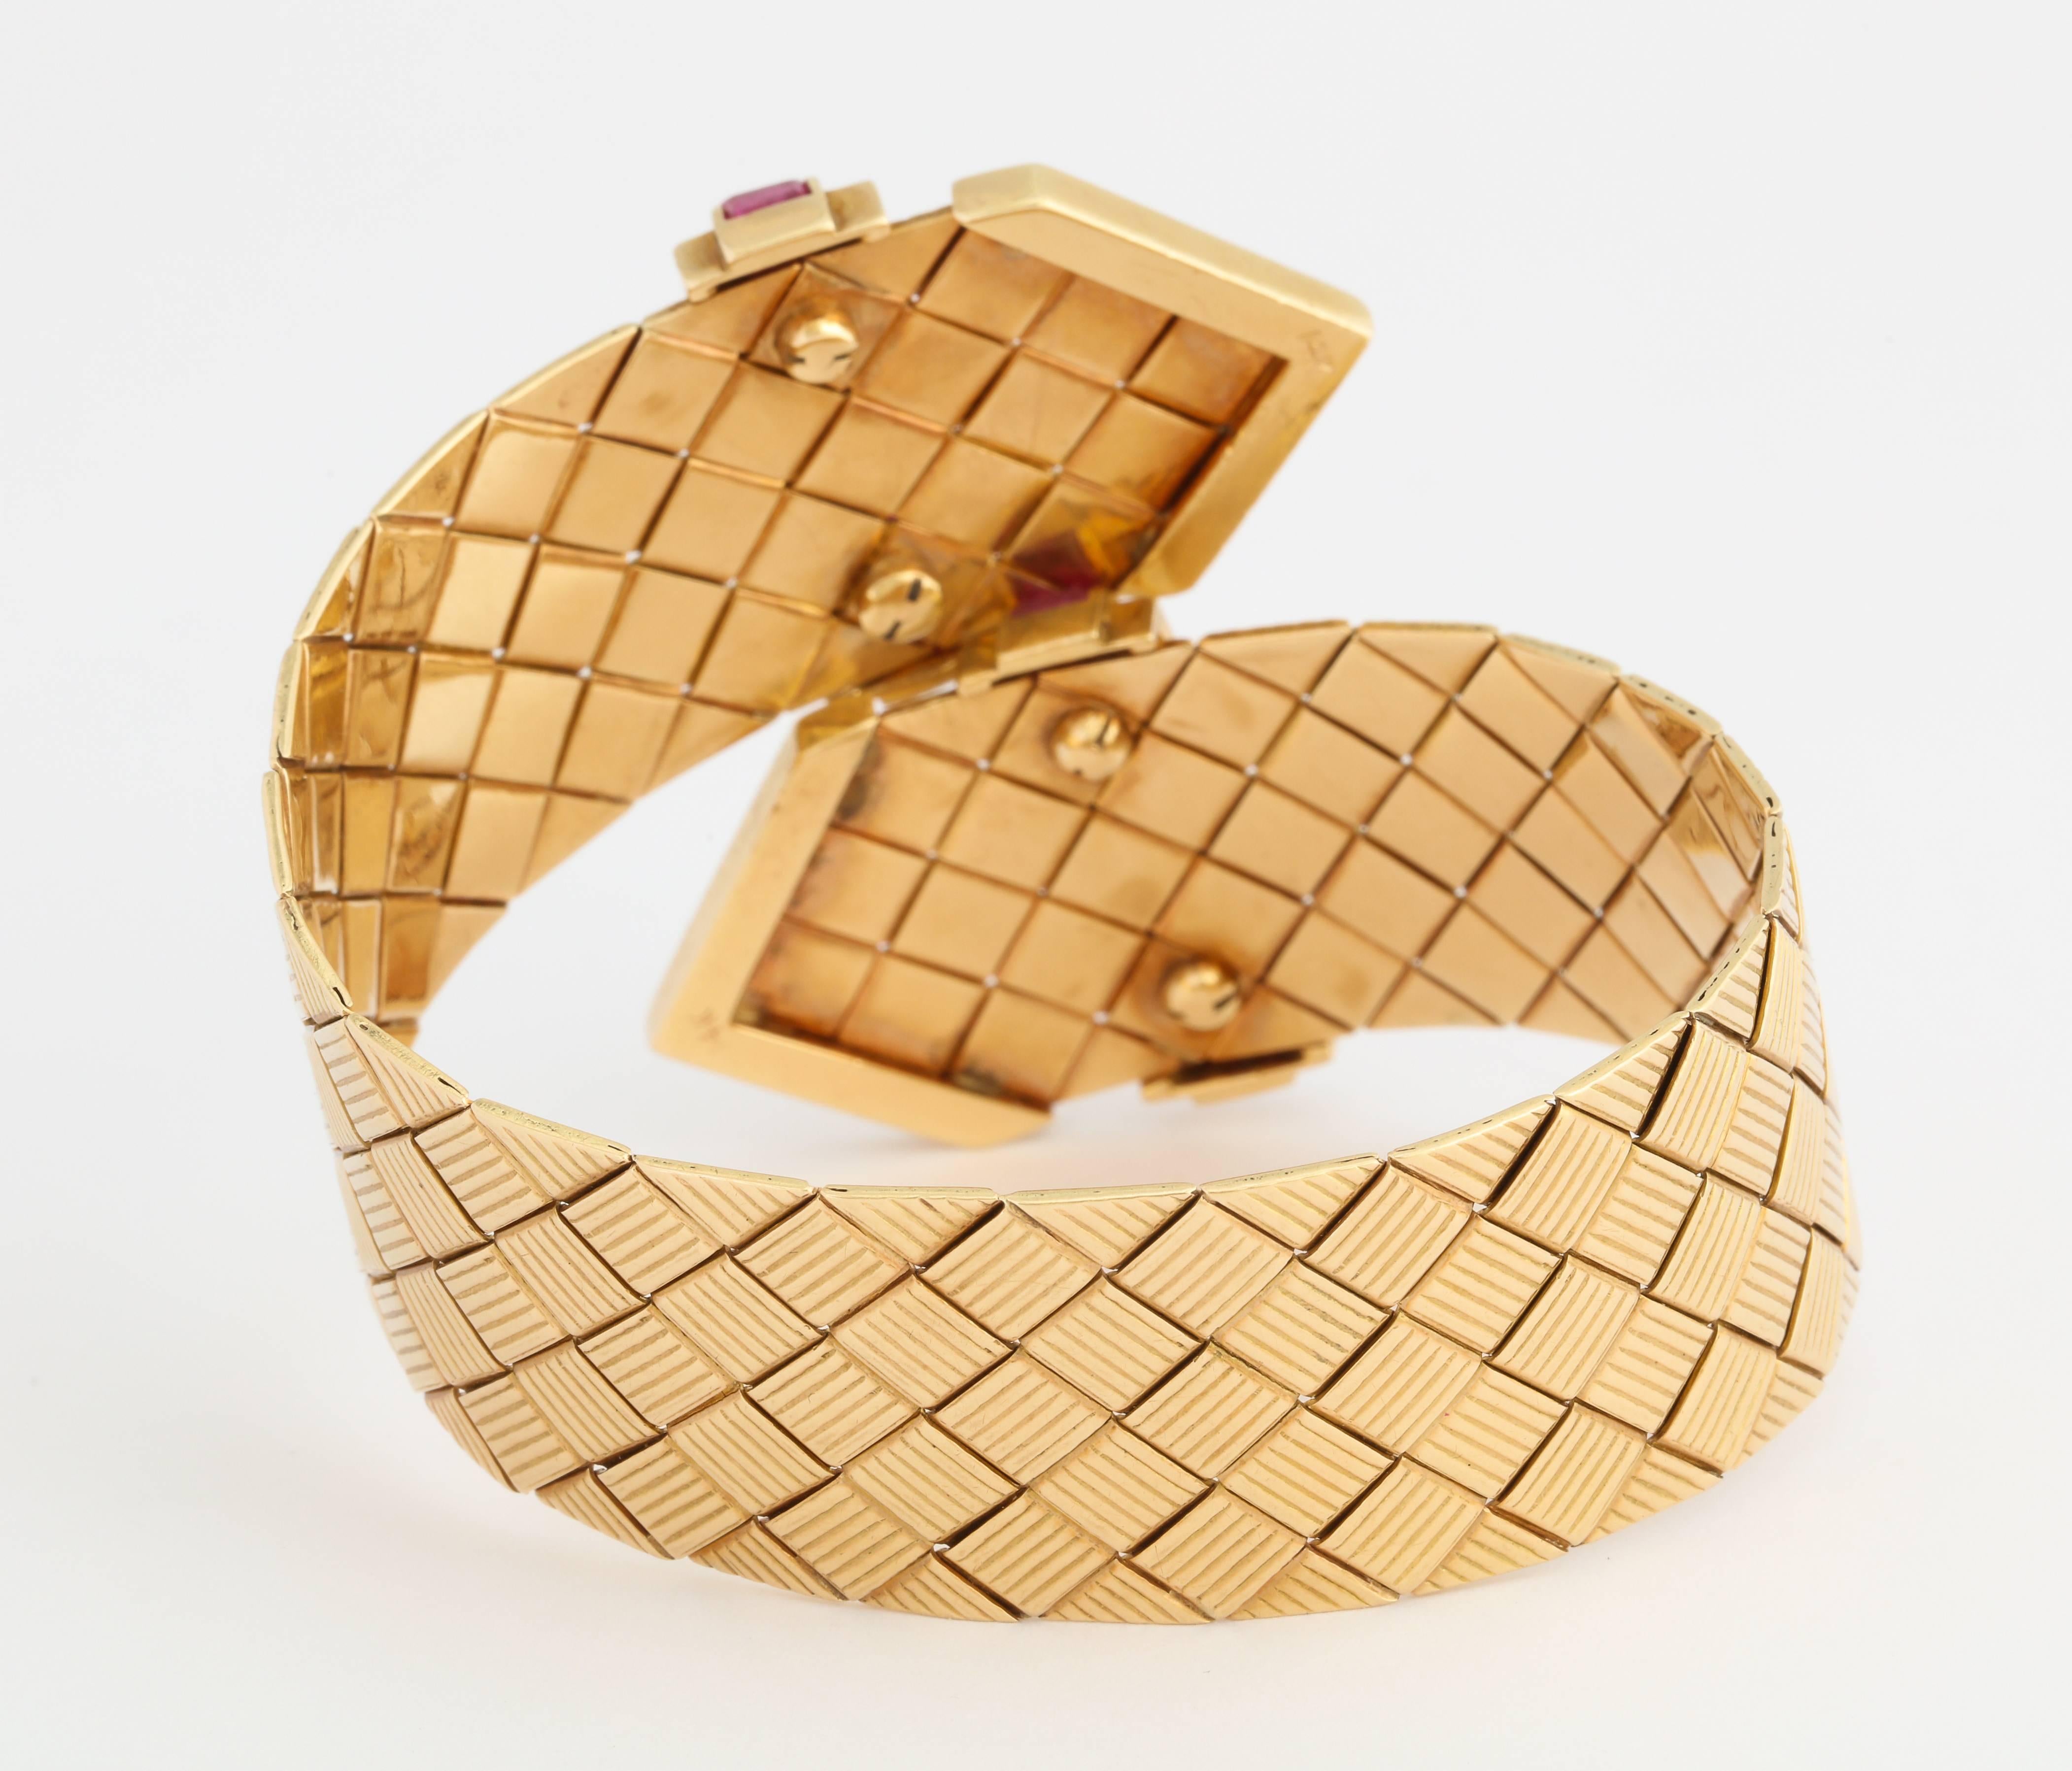 Retro with a modern look, this 1940s crossover bracelet of 14K gold in a basketweave pattern, features bands of matched square-cut rubies, and has a firm springy grip. 2 inches at it's widest, it nicely fits a 6 1/2 inch to a 7 1/2 inch wrist. 